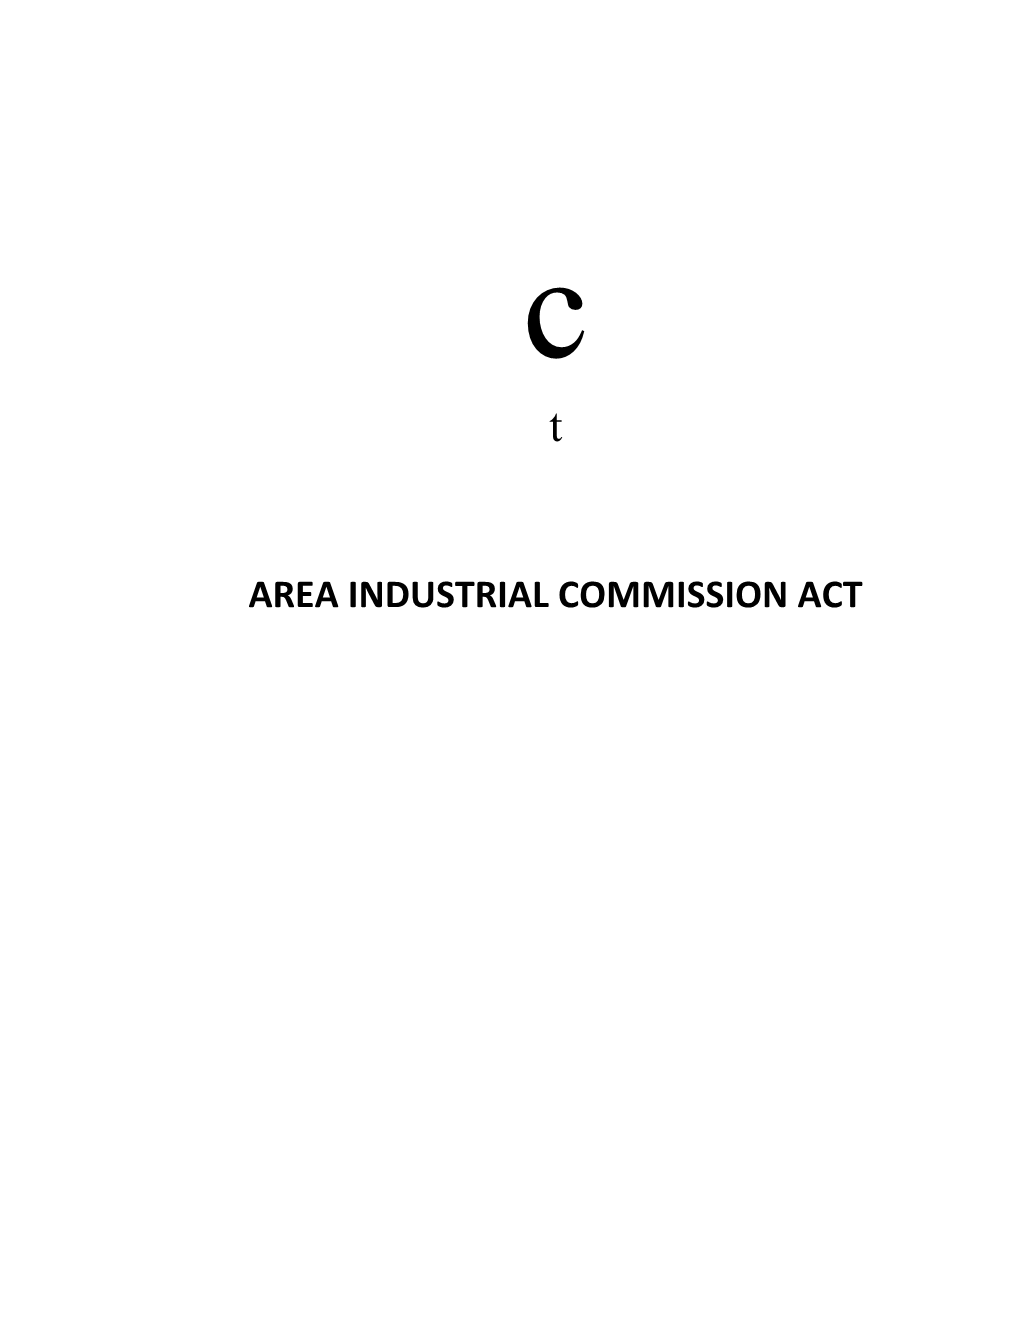 Area Industrial Commission Act